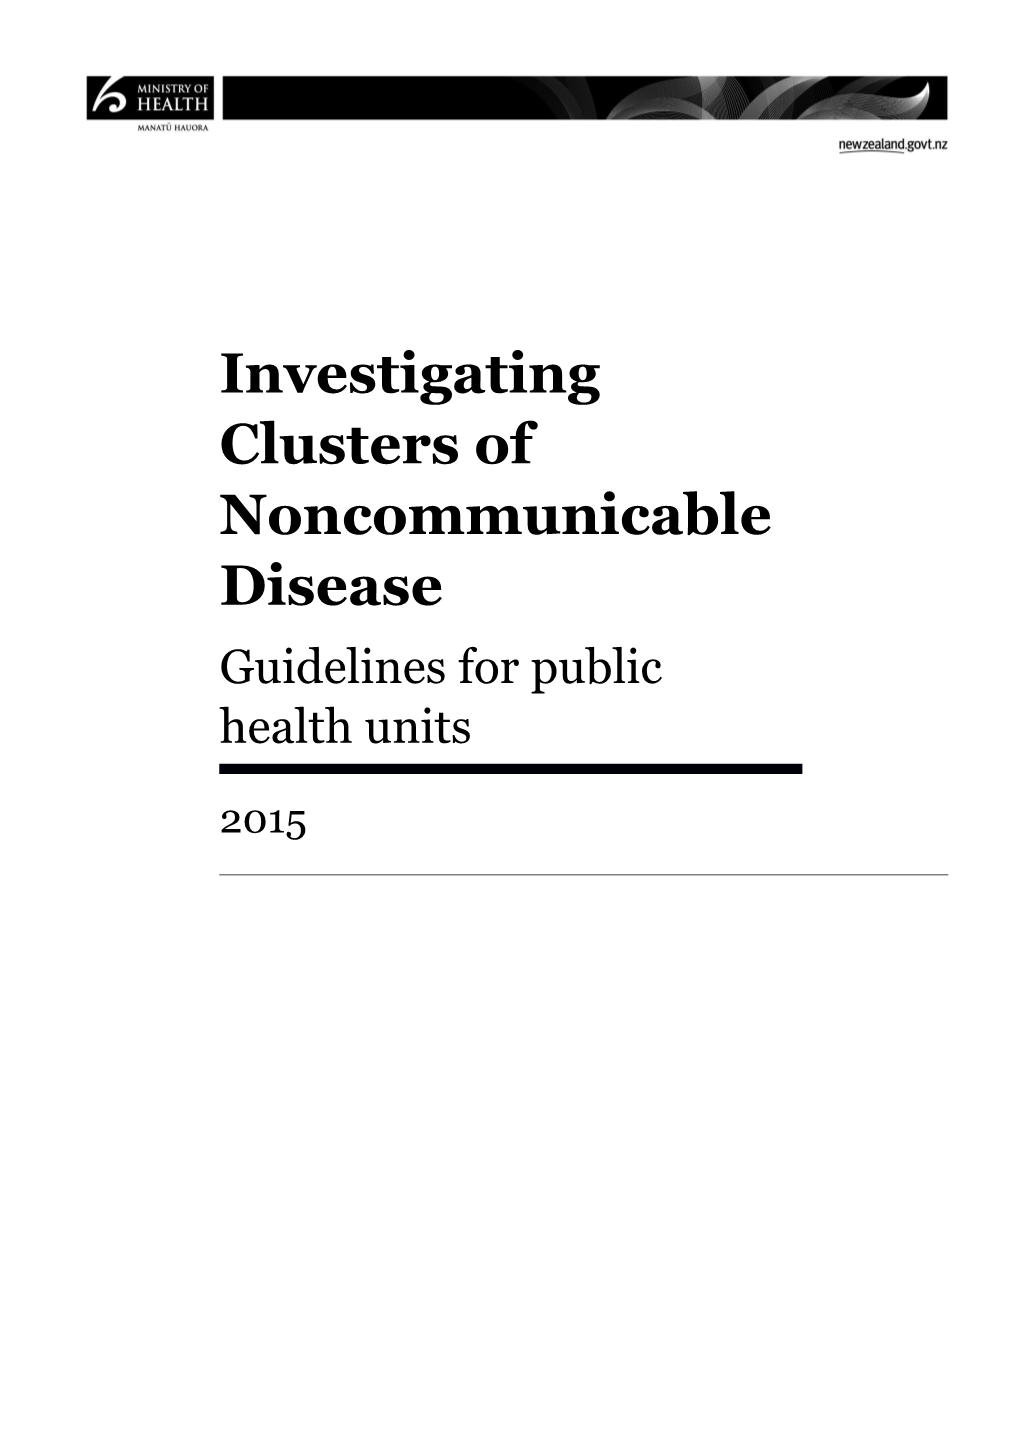 Investigating Clusters of Non-Communicable Disease: Guidelines for Public Health Units